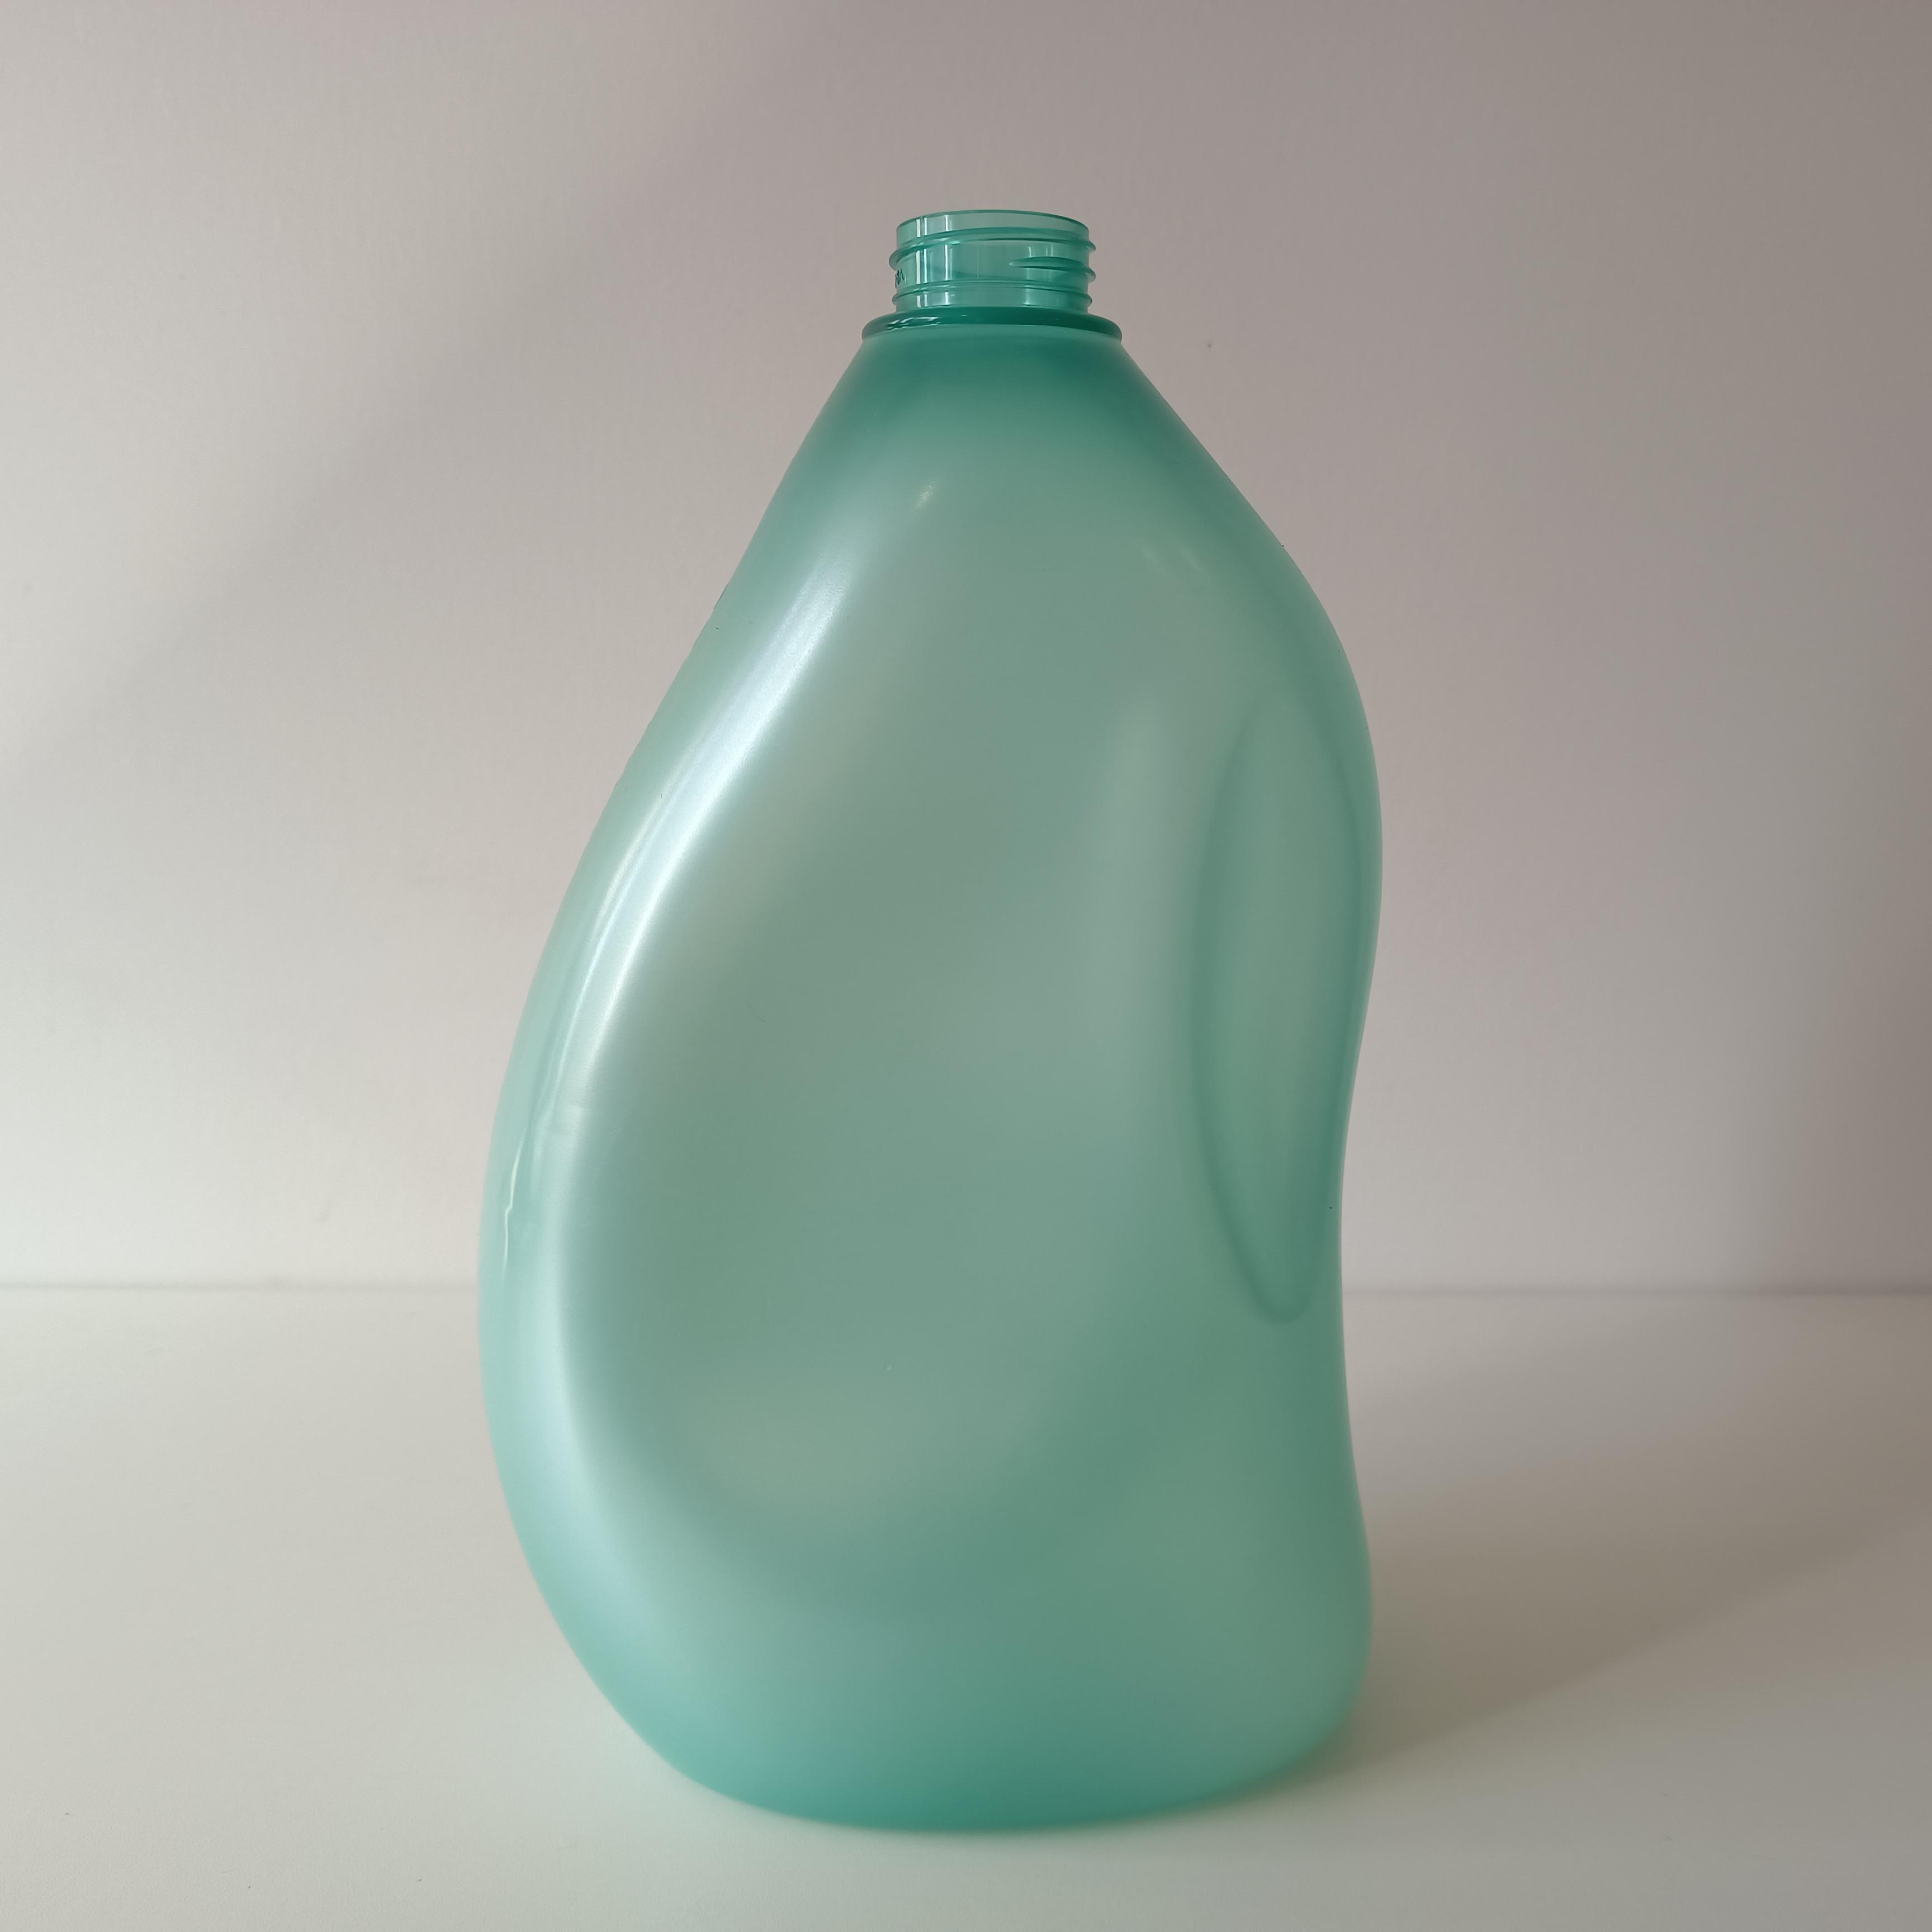 Plastic Bottles With Laundry Detergent